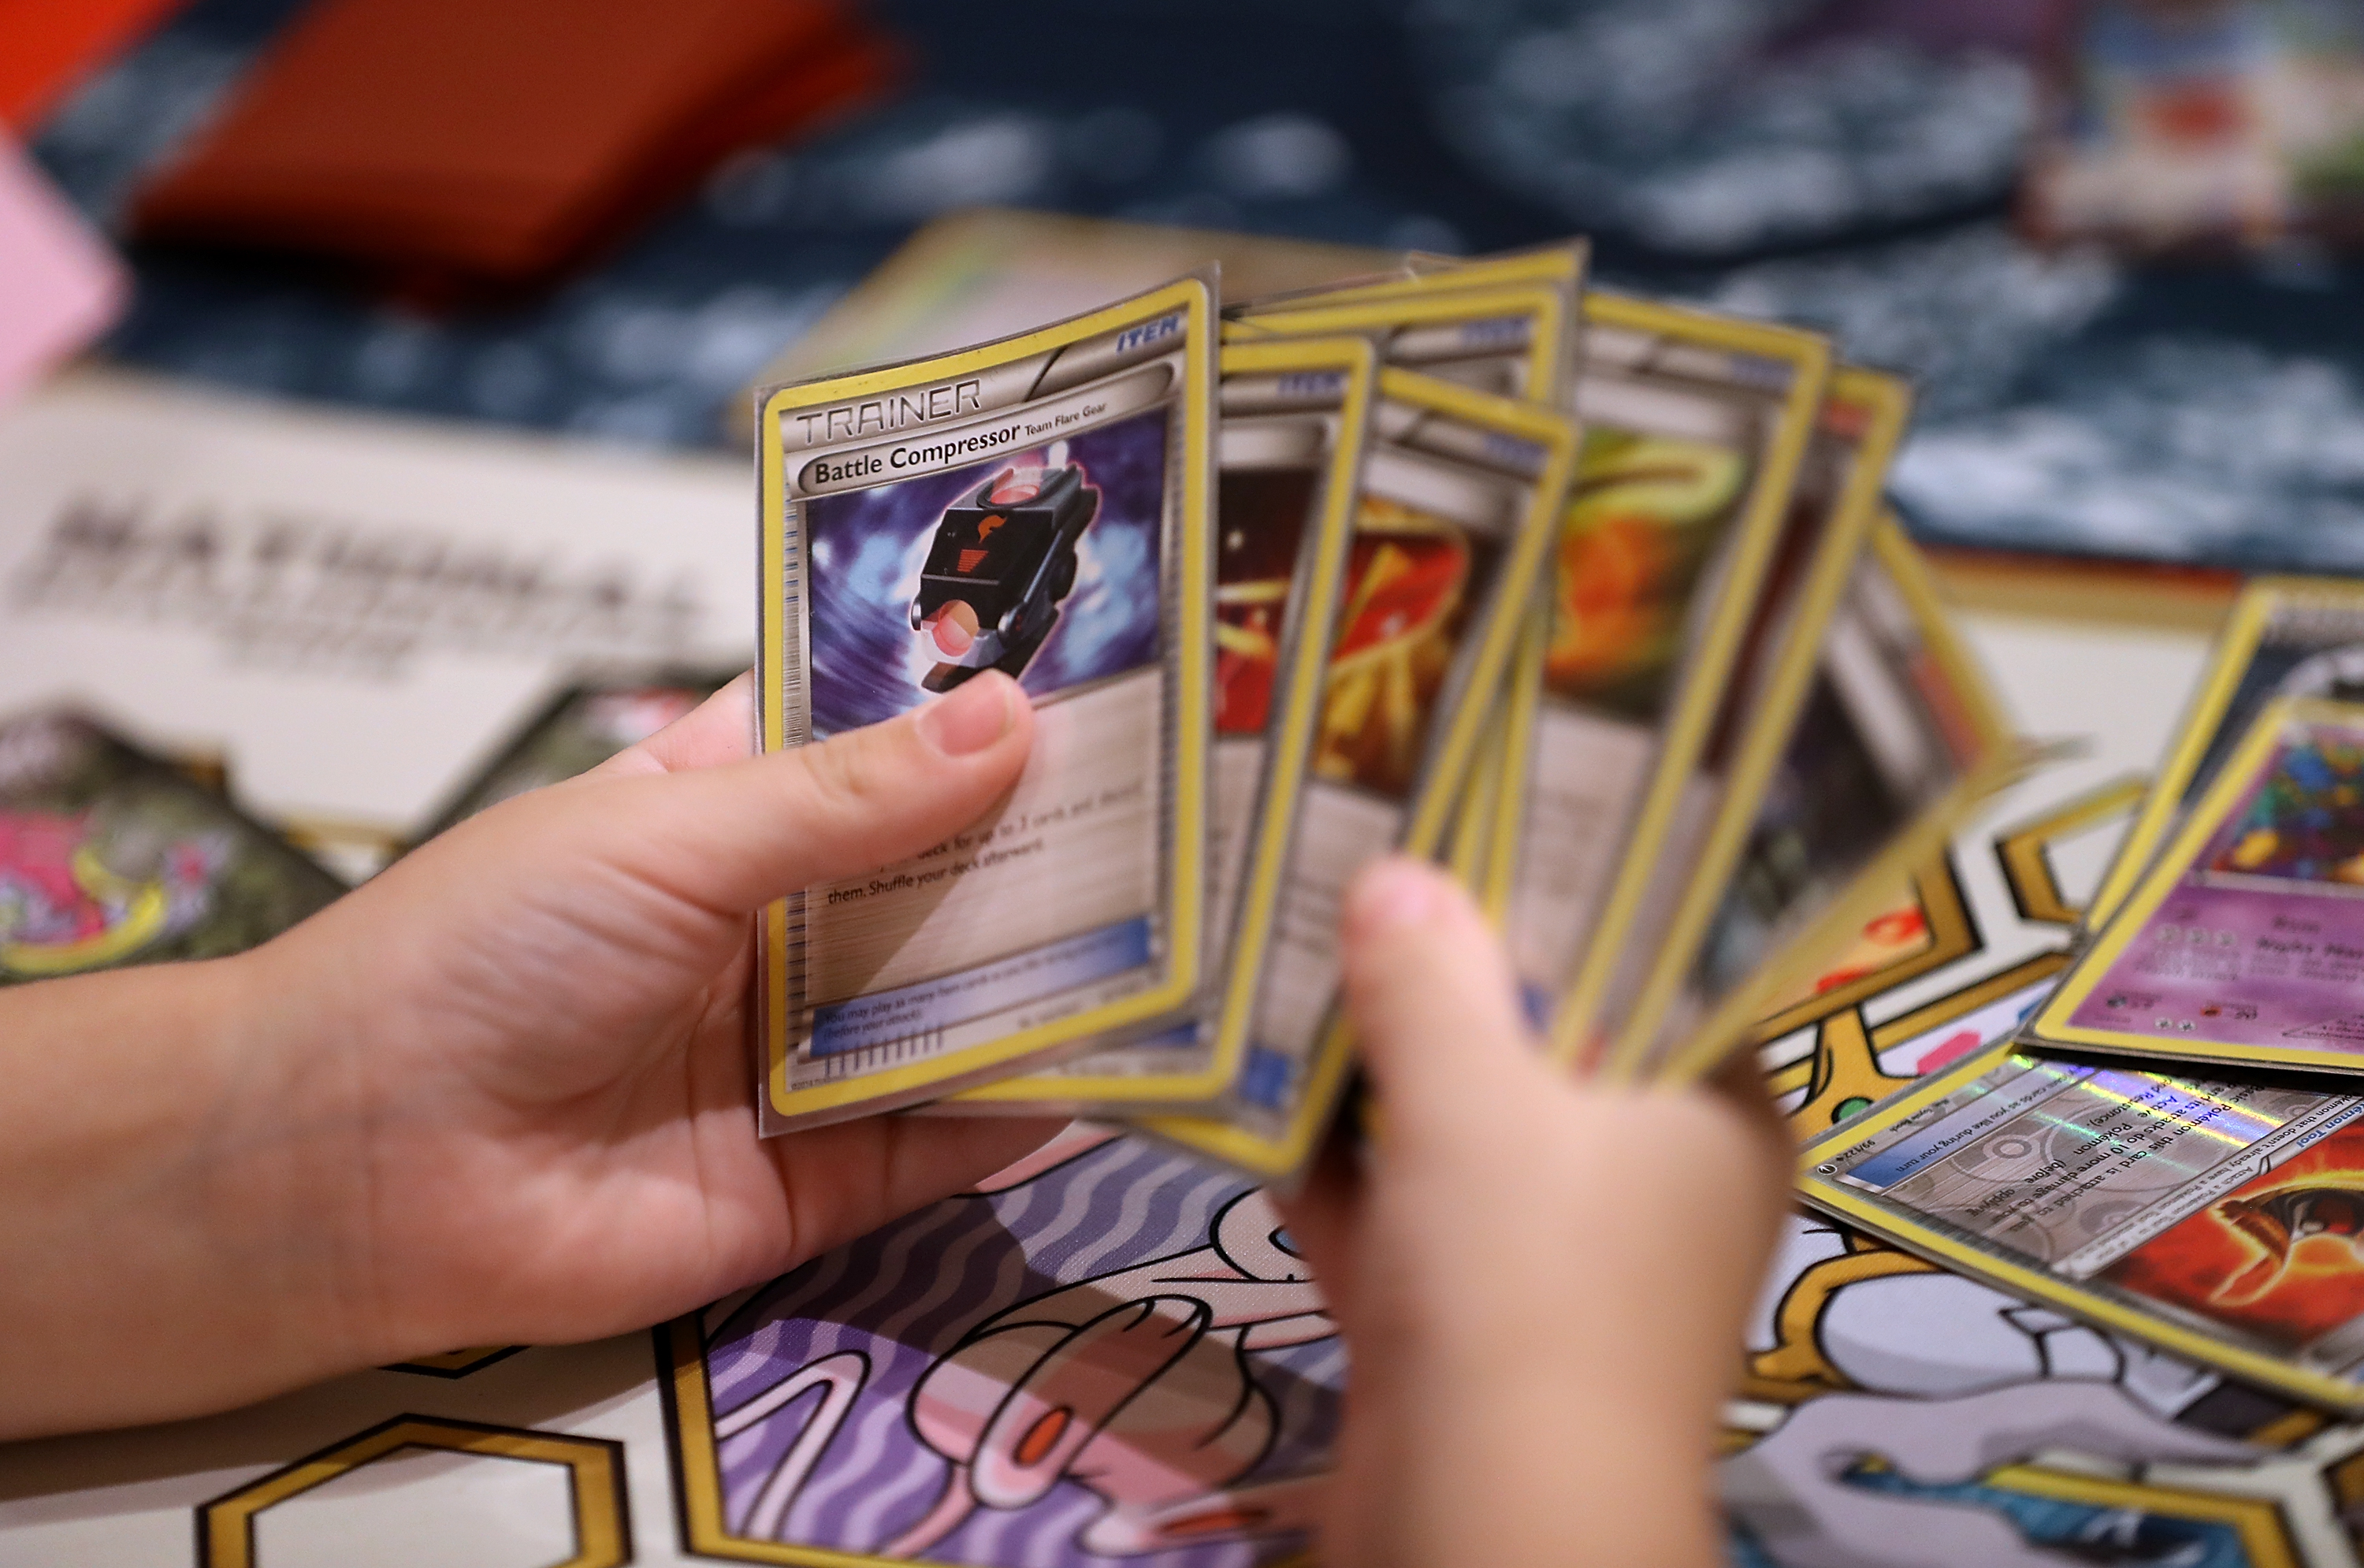 Rare Pokémon Card Expected To Sell For $144K, So Pardon Me While I Dig Up My Ol’ Collection